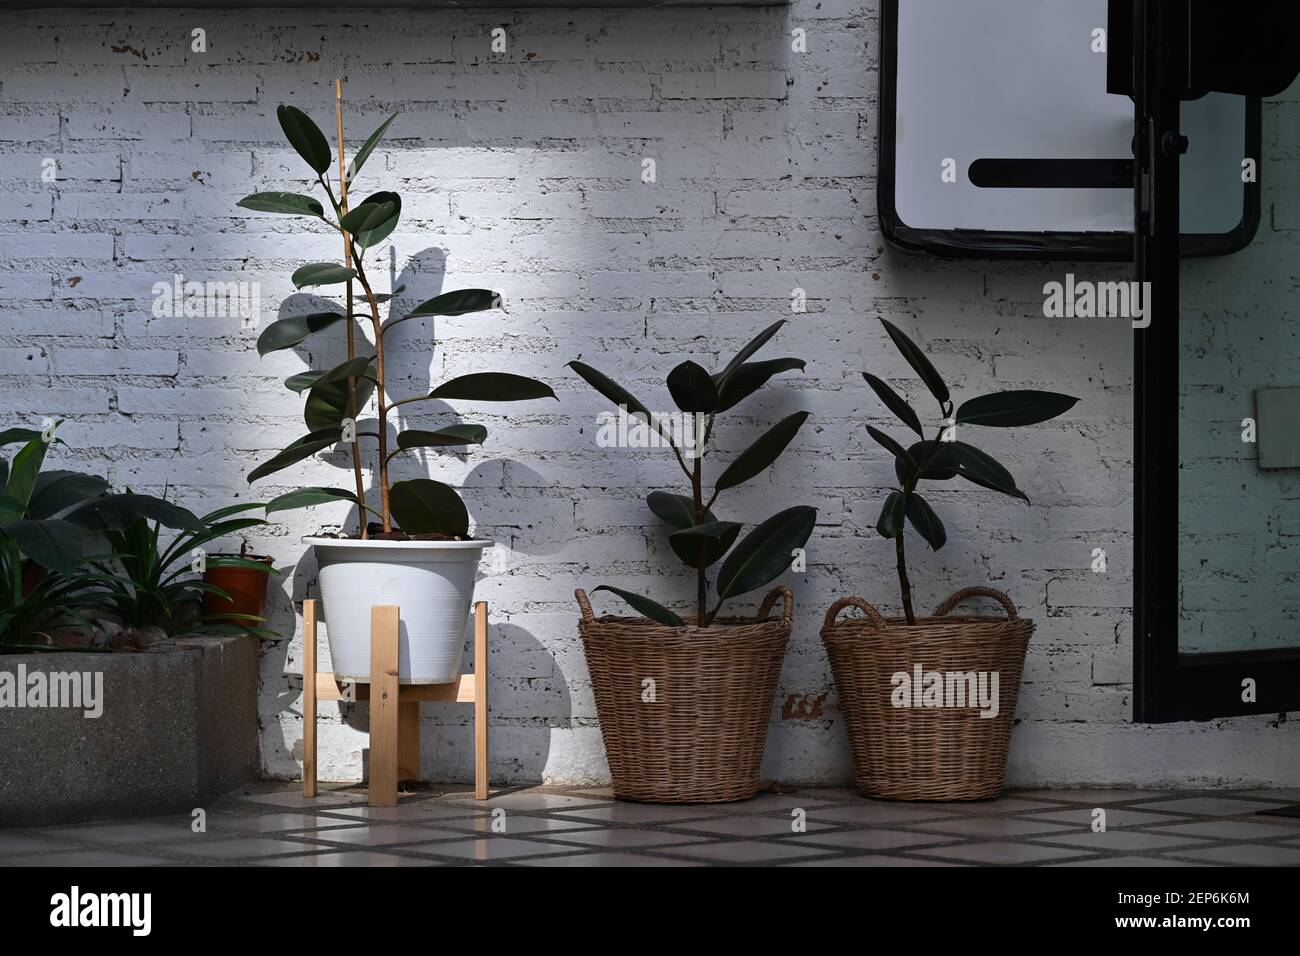 Modern houseplants Ficus Elastica Burgundy or rubber plant in rattan basket at stylish home decor. Stock Photo